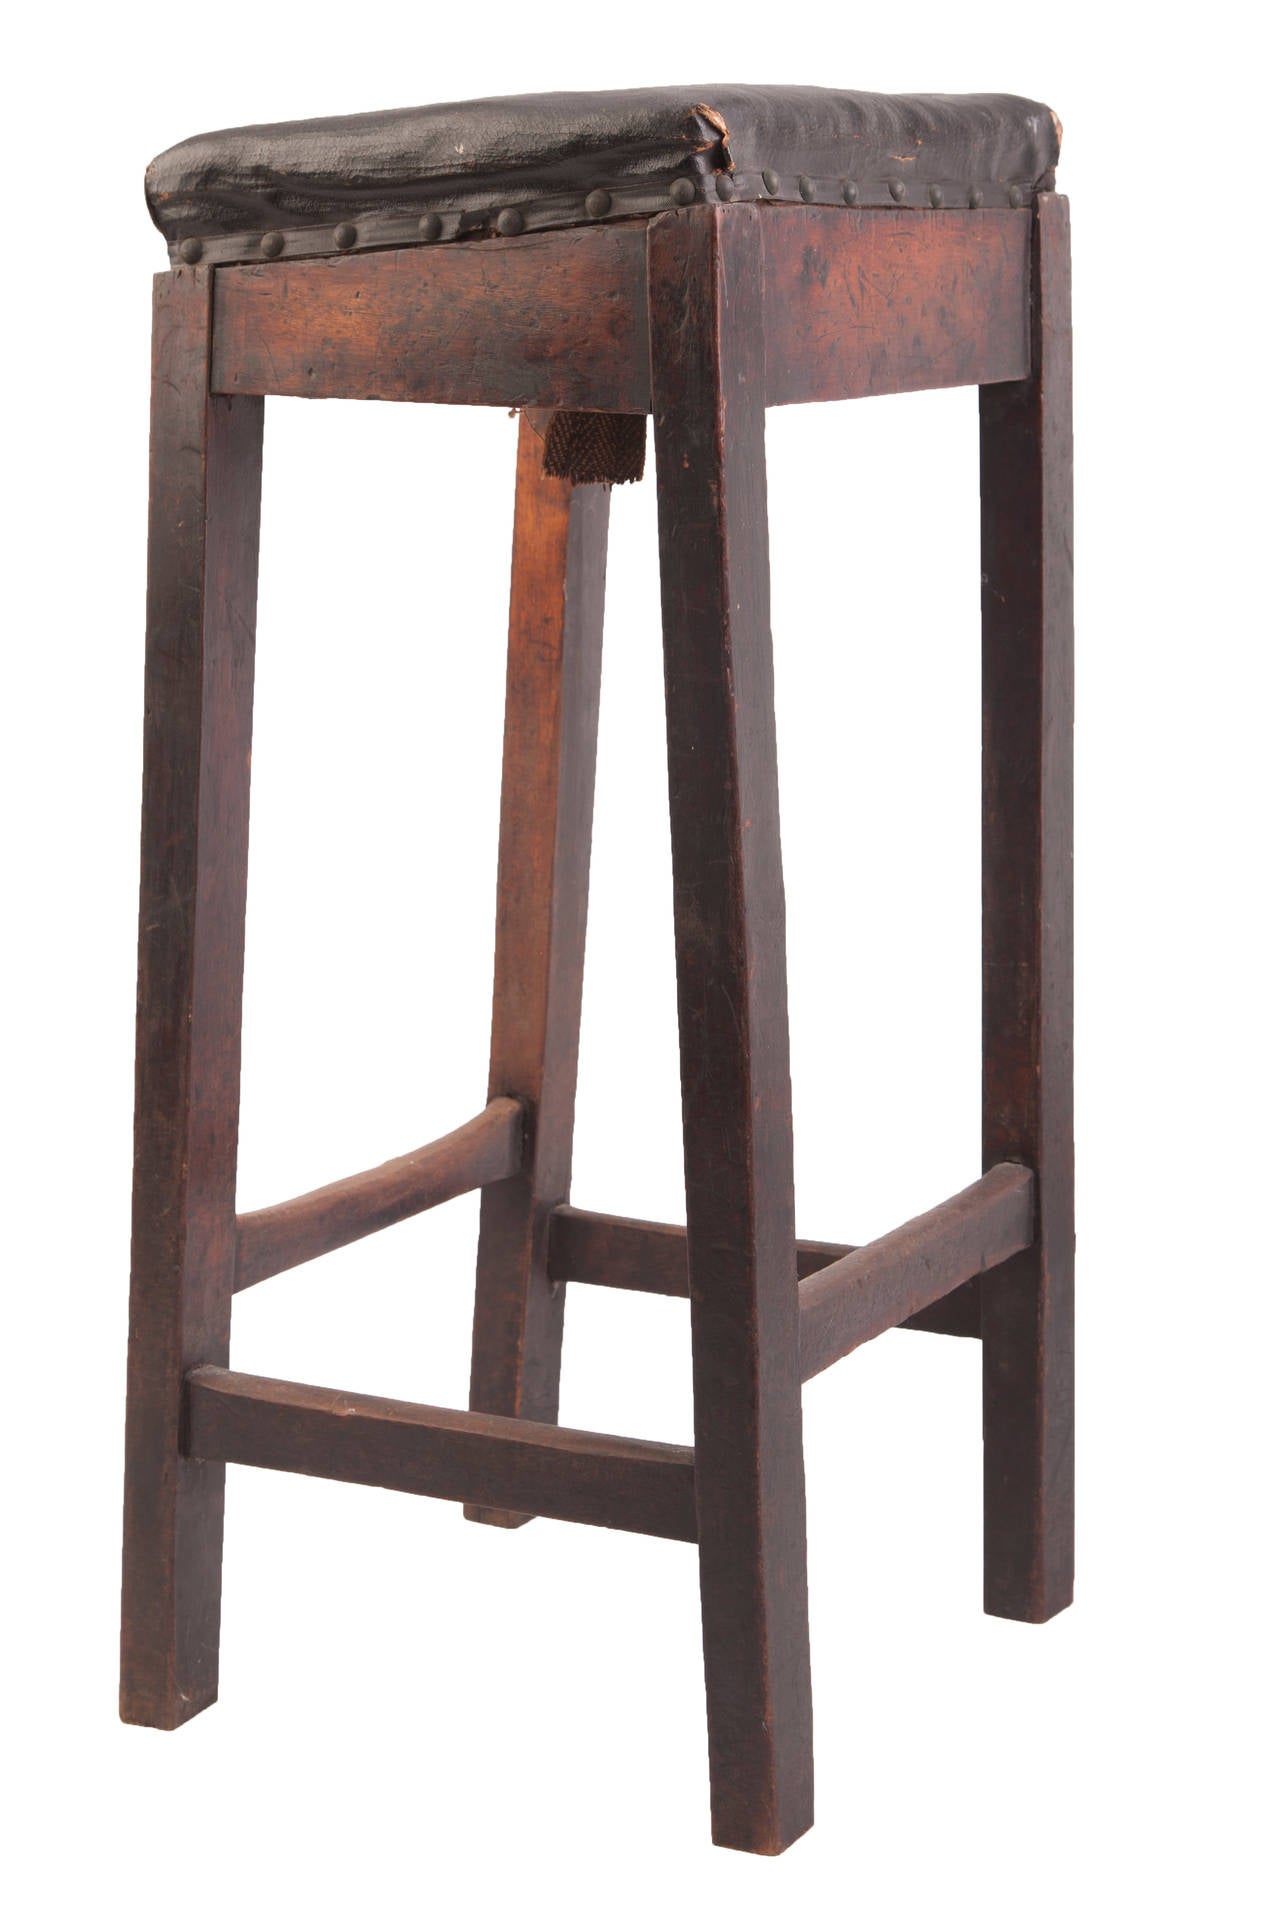 Authentic, arcchtes stool with mahogany frame black leather and old neailhead trim.